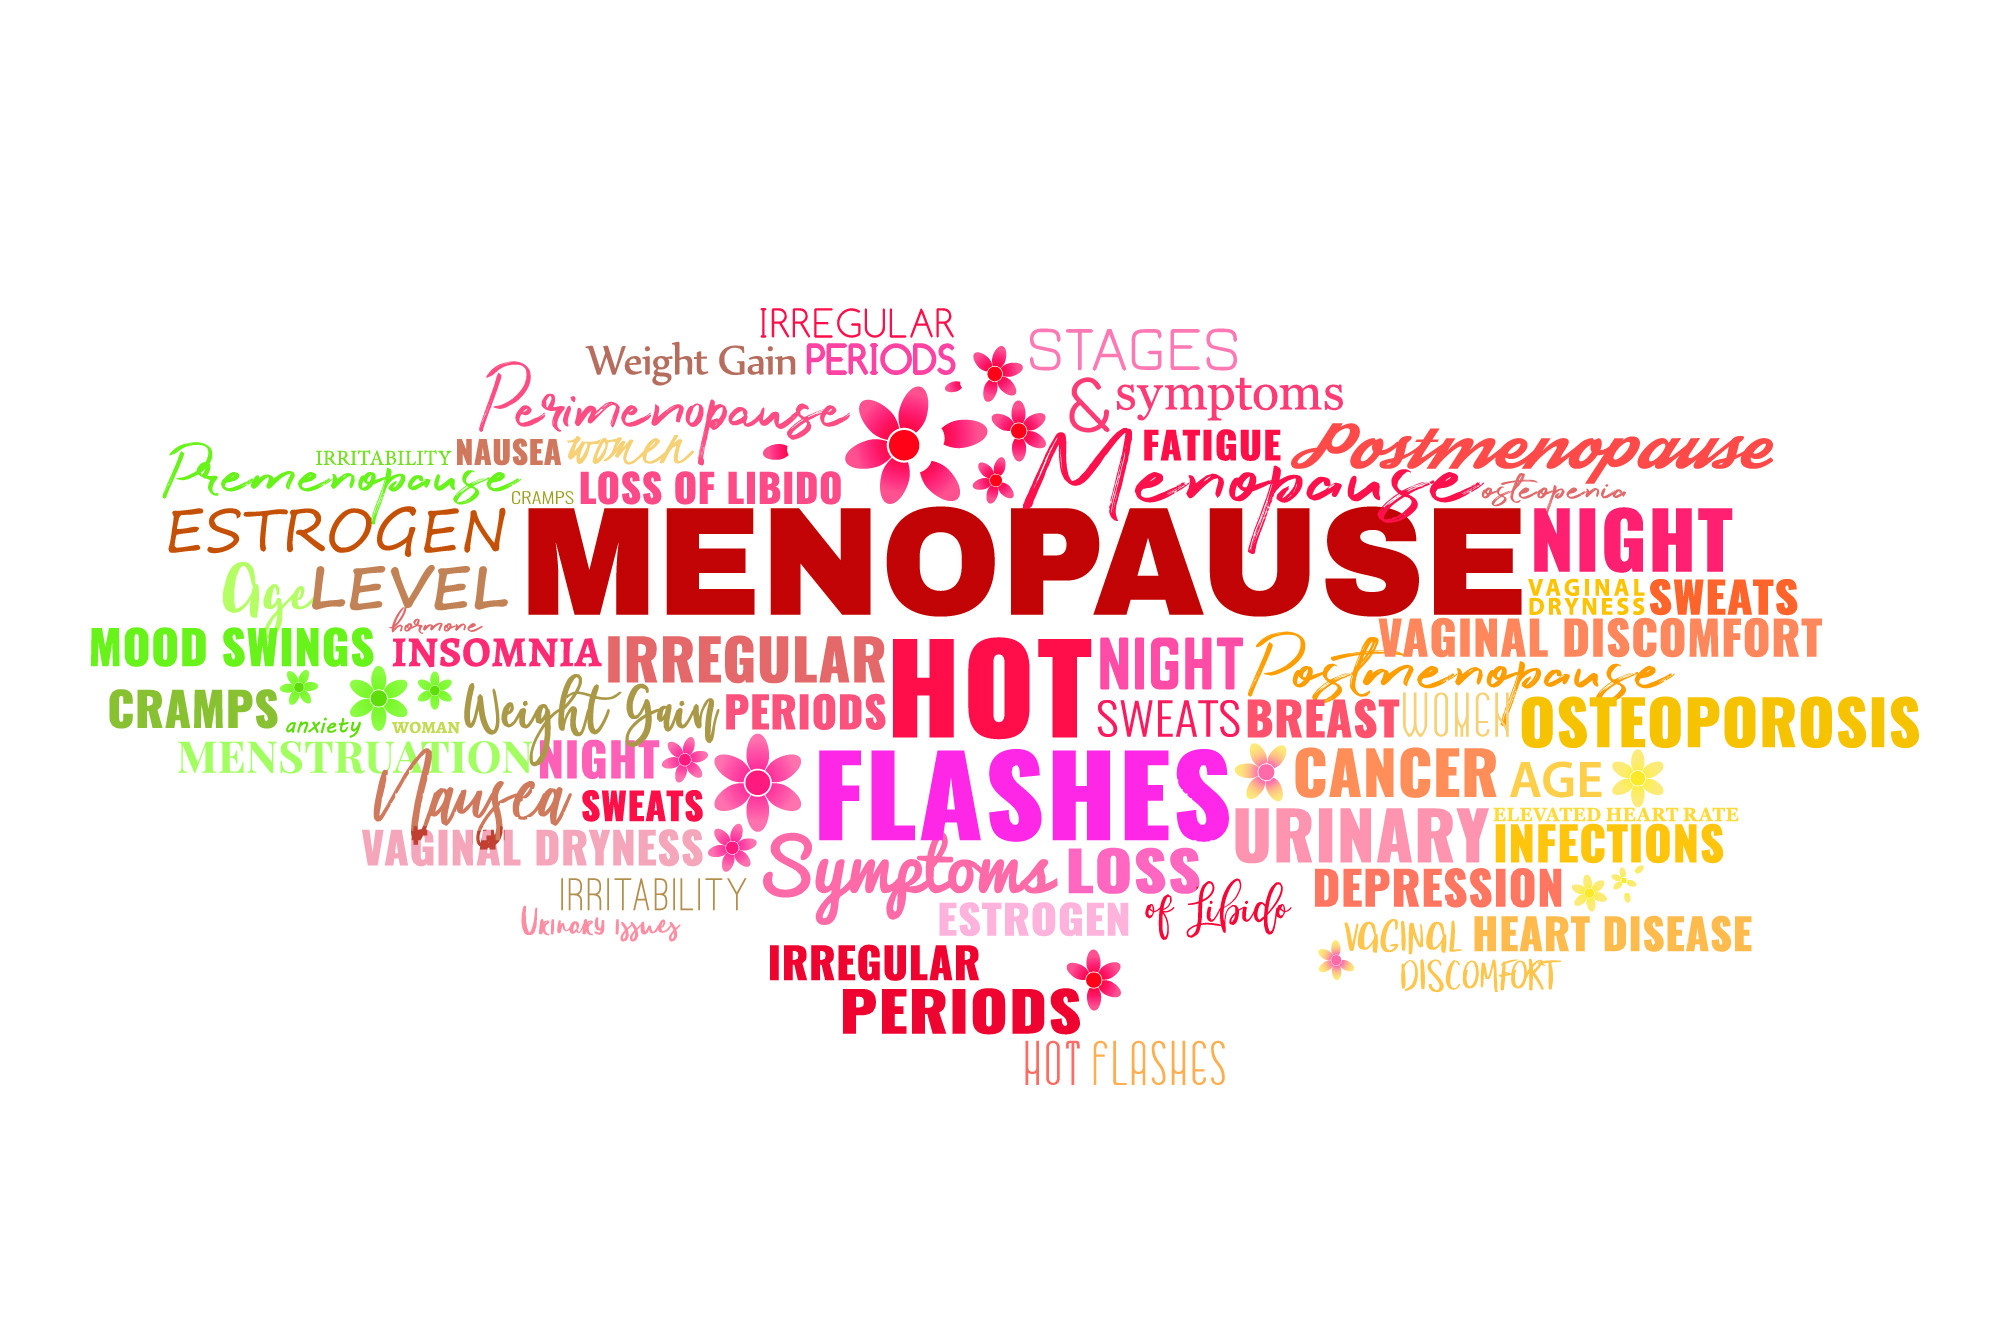 What are the symptoms of the menopause